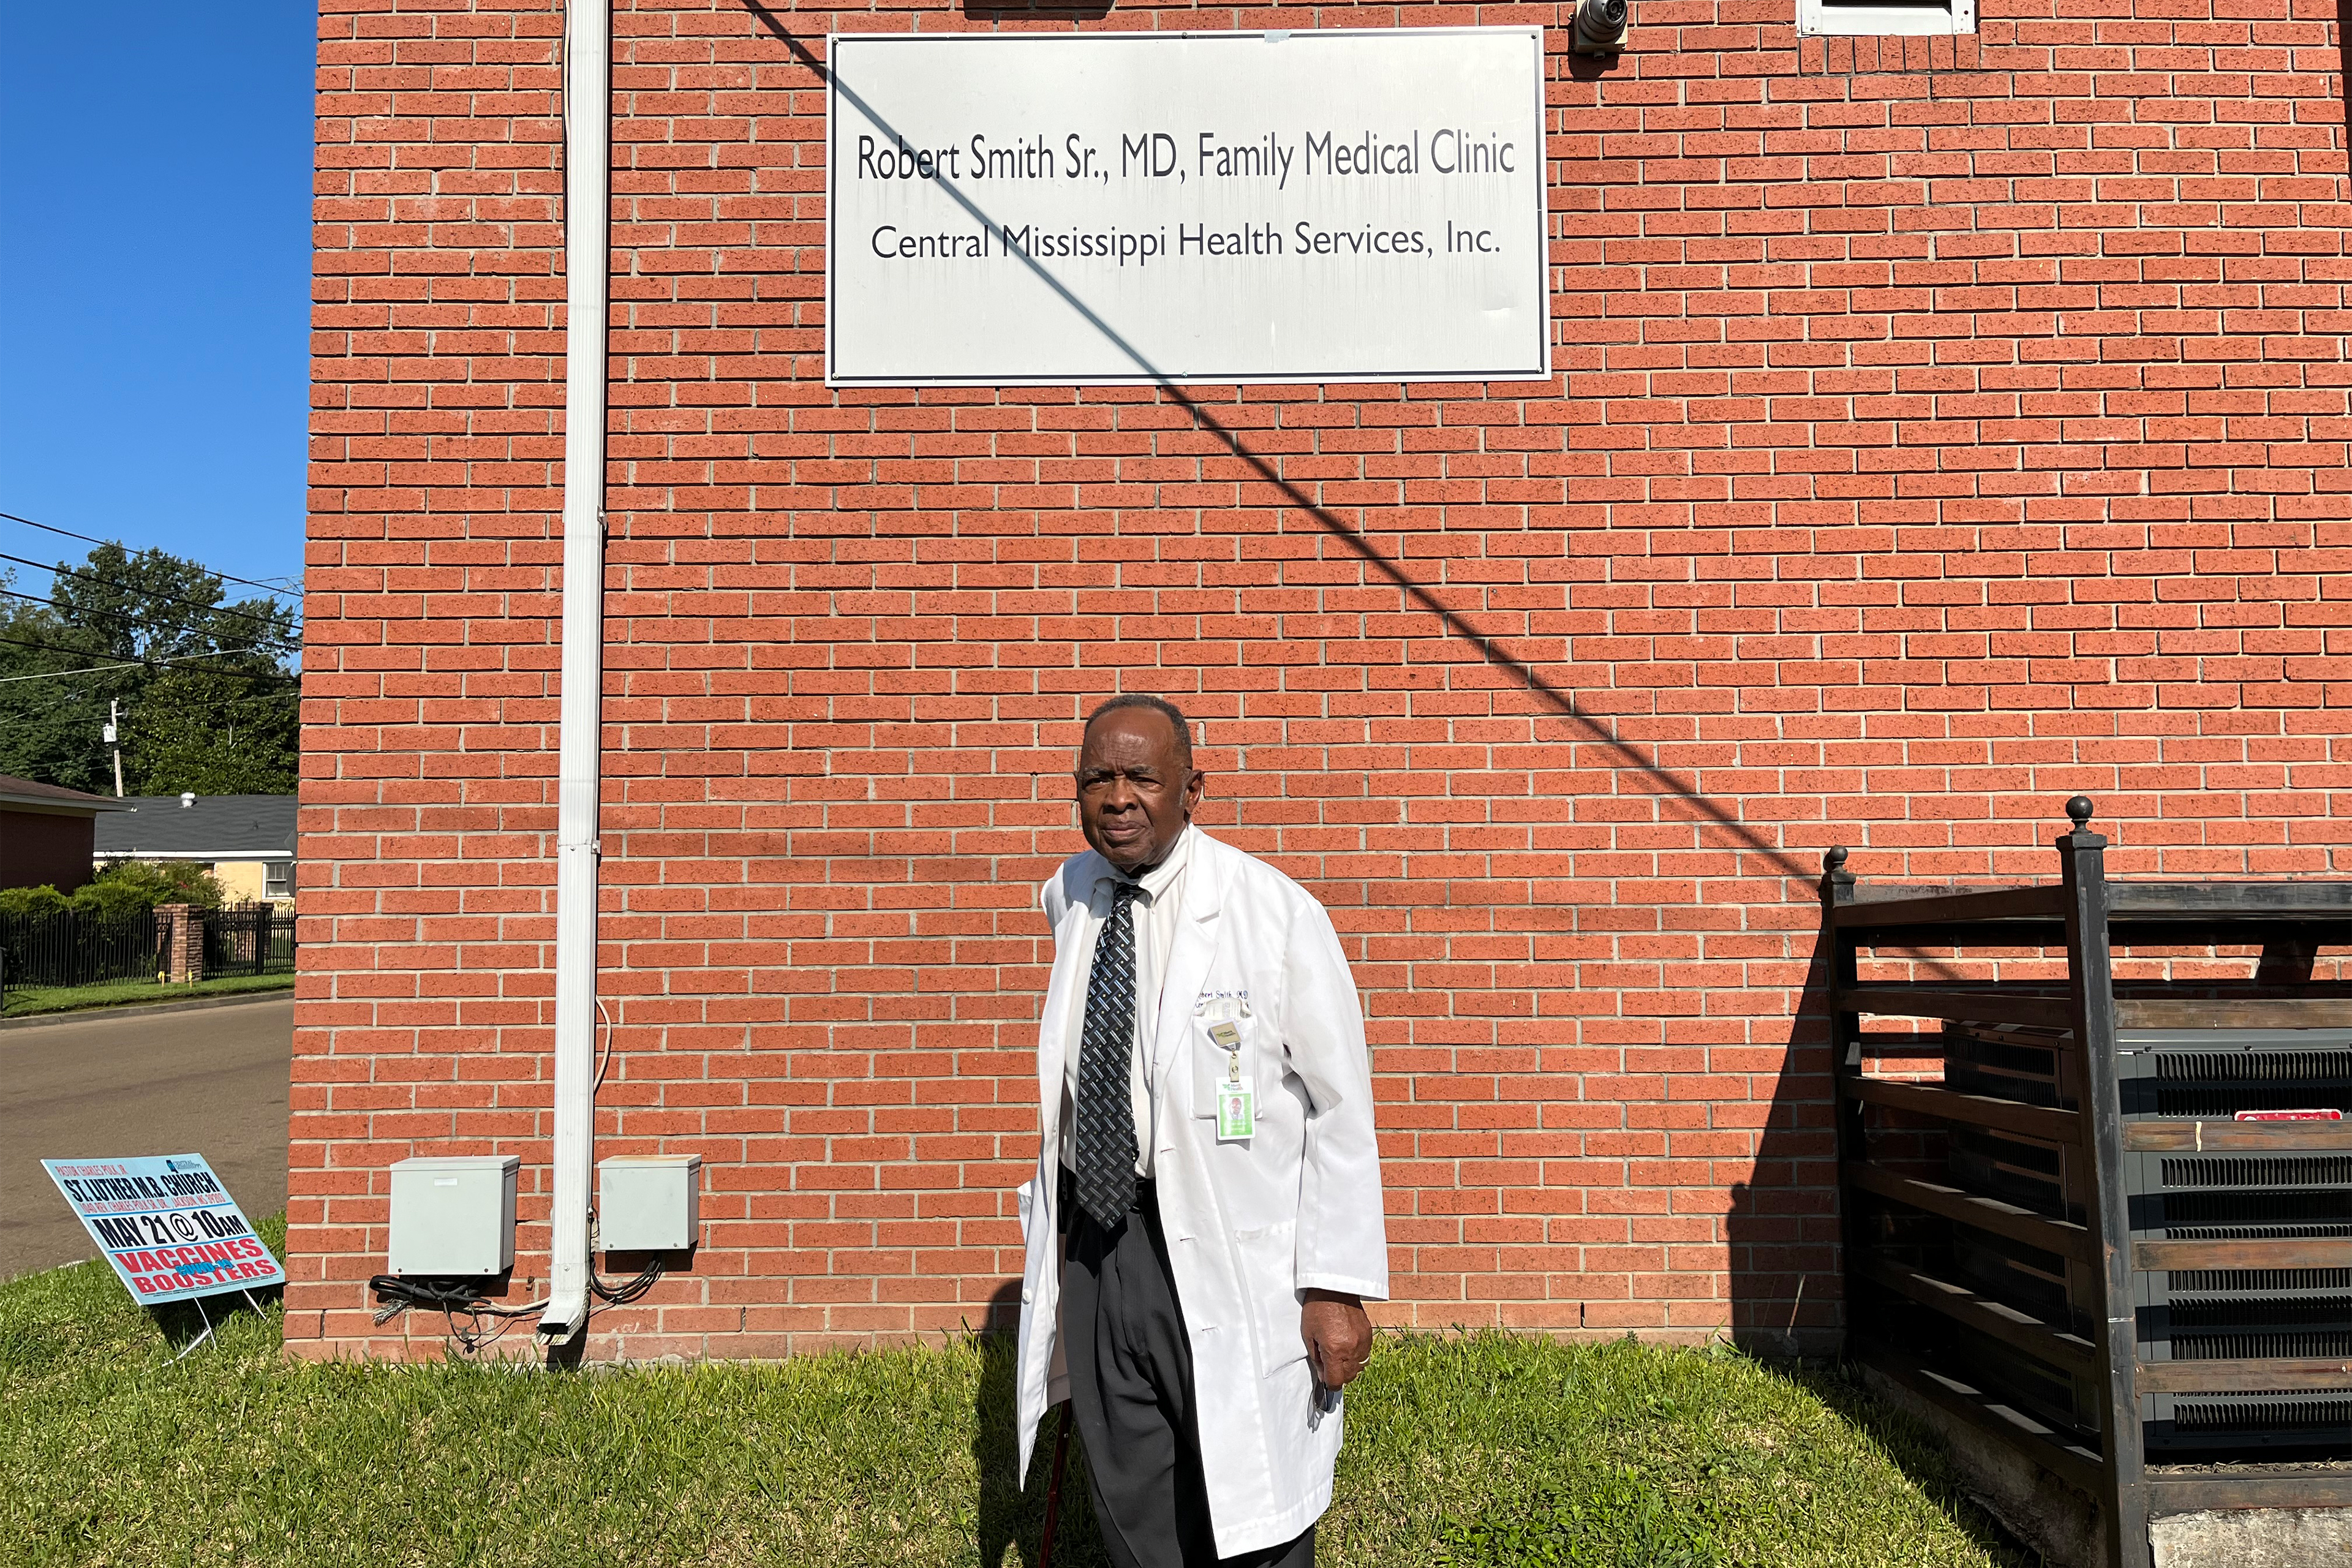 A photo shows Dr. Robert Smith standing outside the Central Mississippi 国产精品视频 Services building.